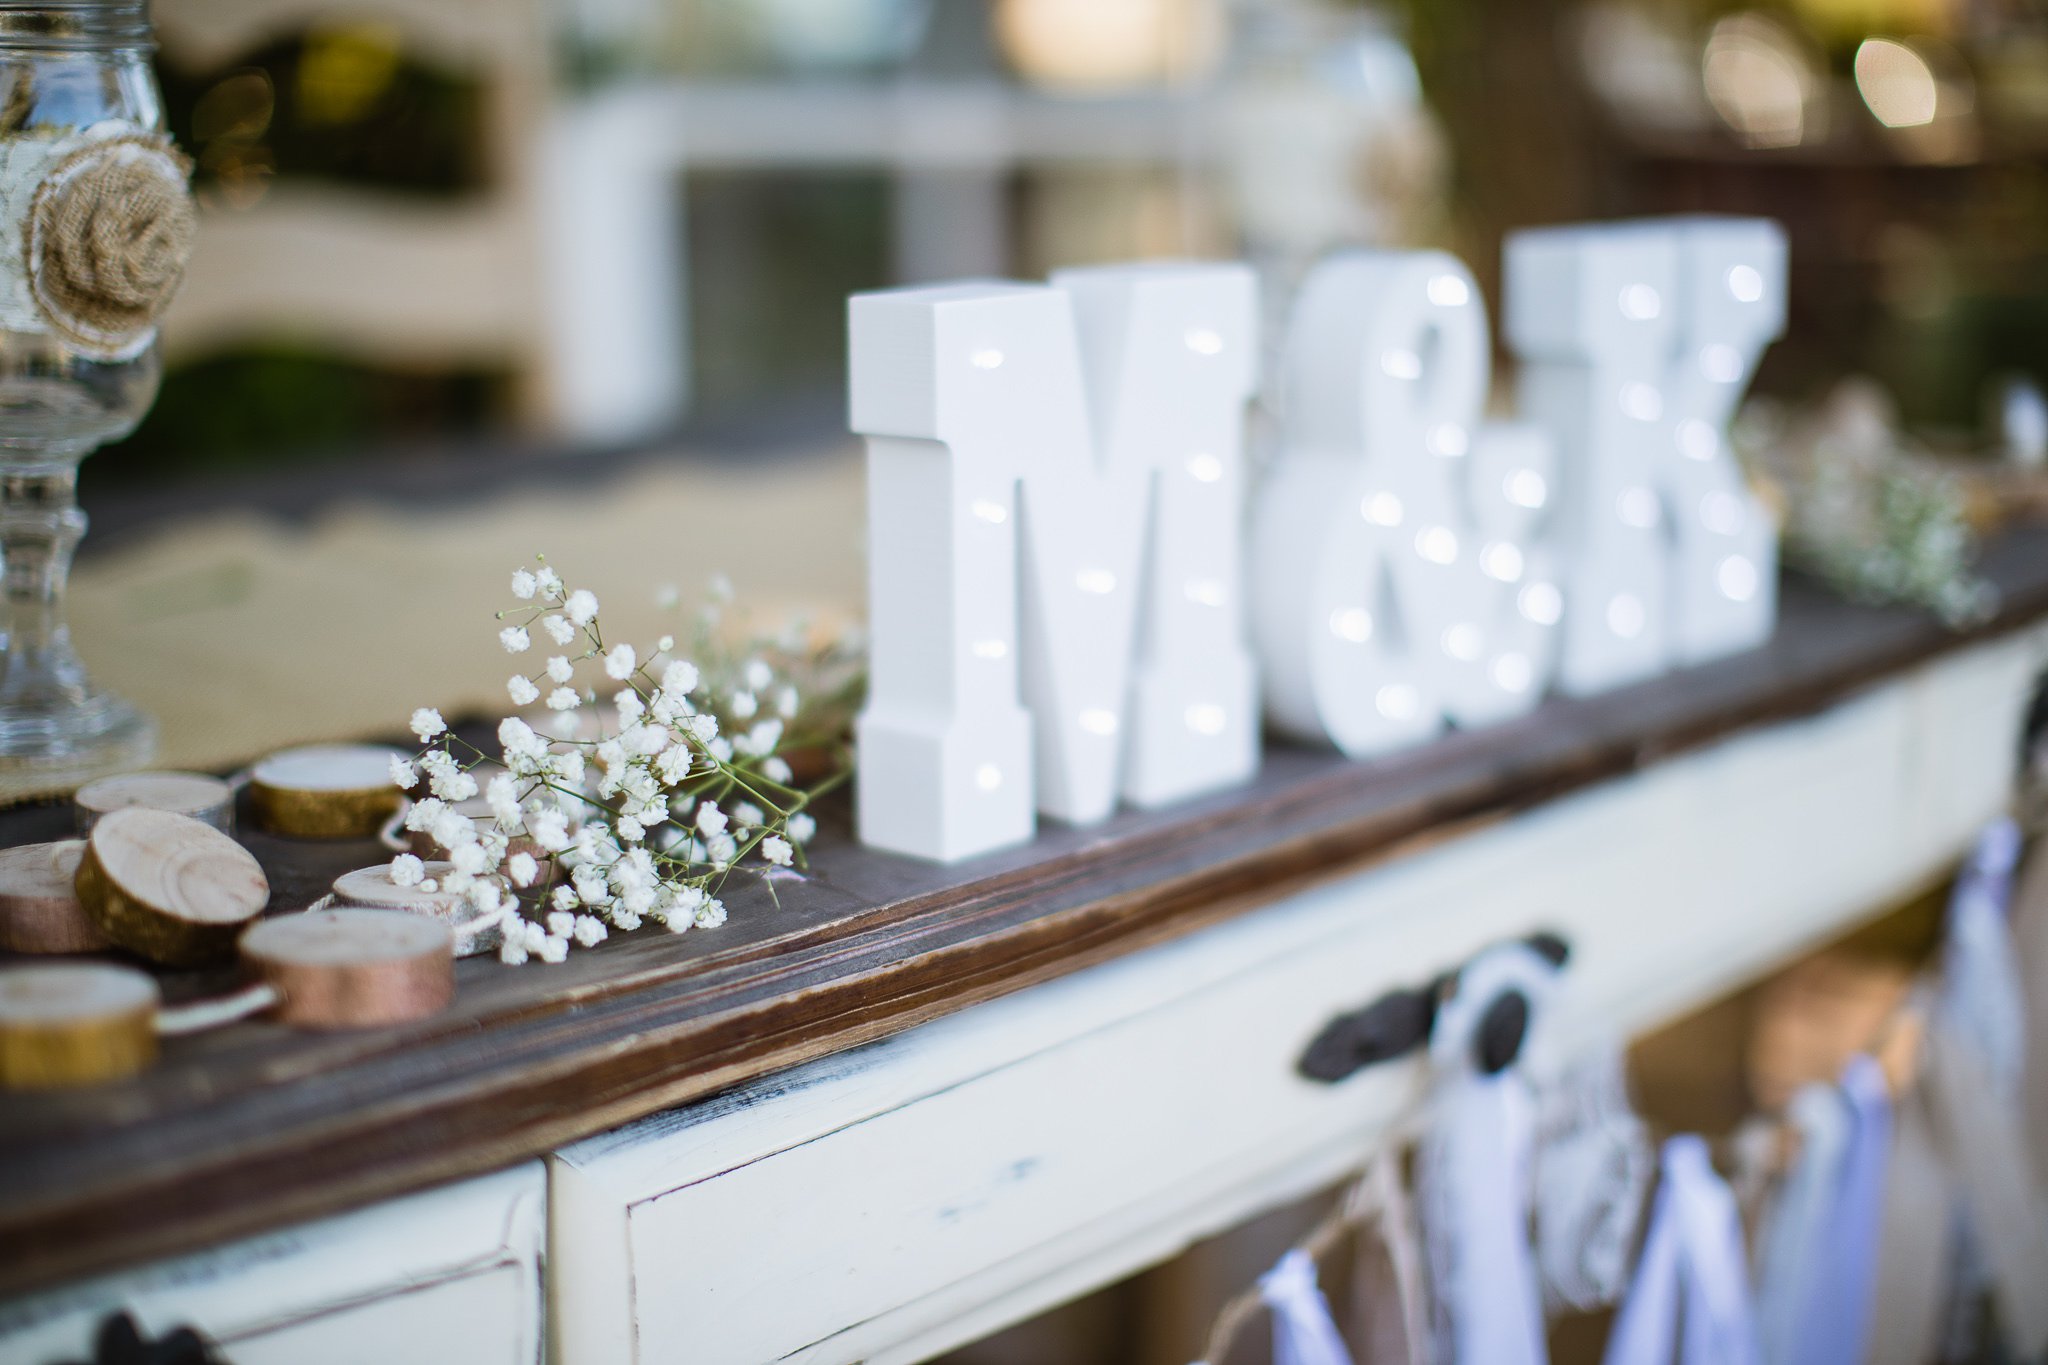 Rustic chic wedding reception decorations of wood slices, babies breath, and couples initials by Arizona wedding photographers PMA Photography.